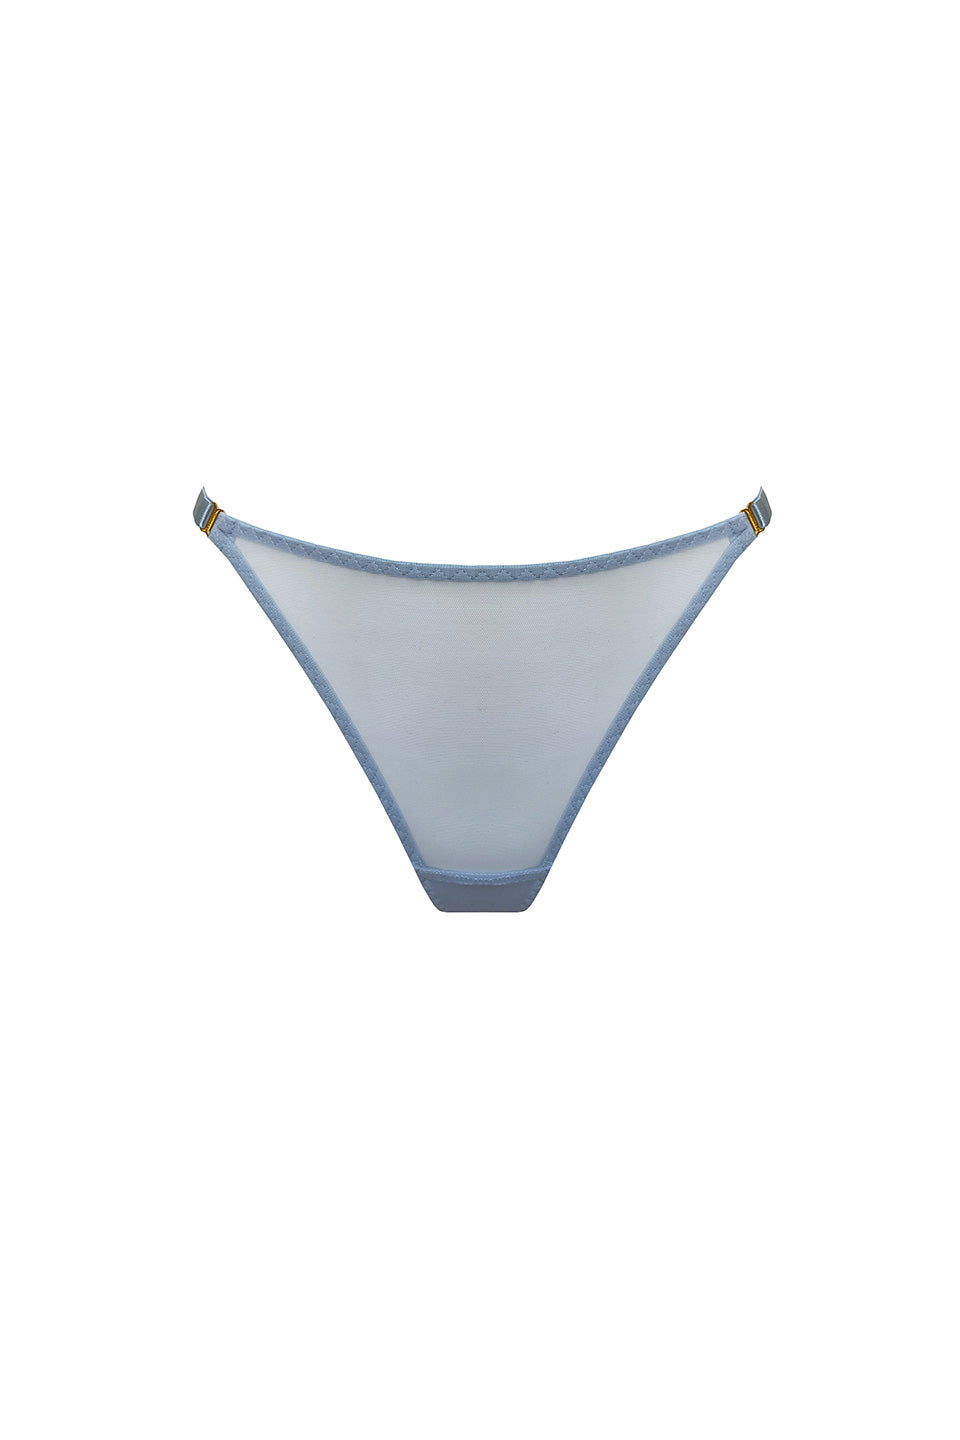 Thumbnail for Product gallery 1, Vero Thong Dusty Blue